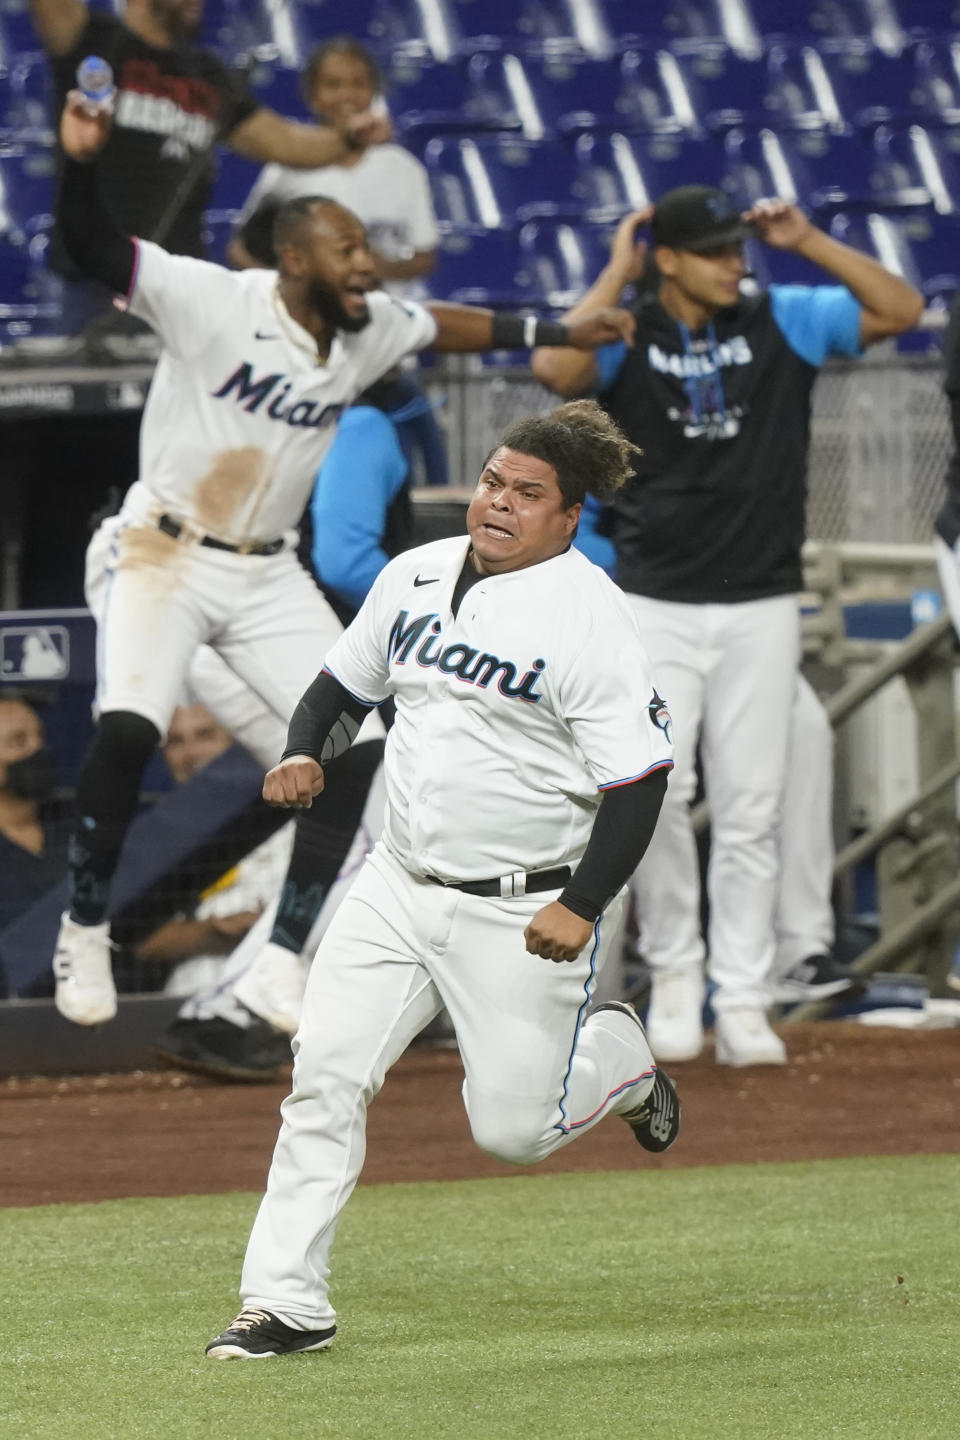 Miami Marlins Willians Astudillo (37) runs to score the winning run on a single by Jesus Aguilar in the tenth inning of a baseball game against the Washington Nationals, Wednesday, June 8, 2022, in Miami. The Marlins defeated the Nationals 2-1. (AP Photo/Marta Lavandier)